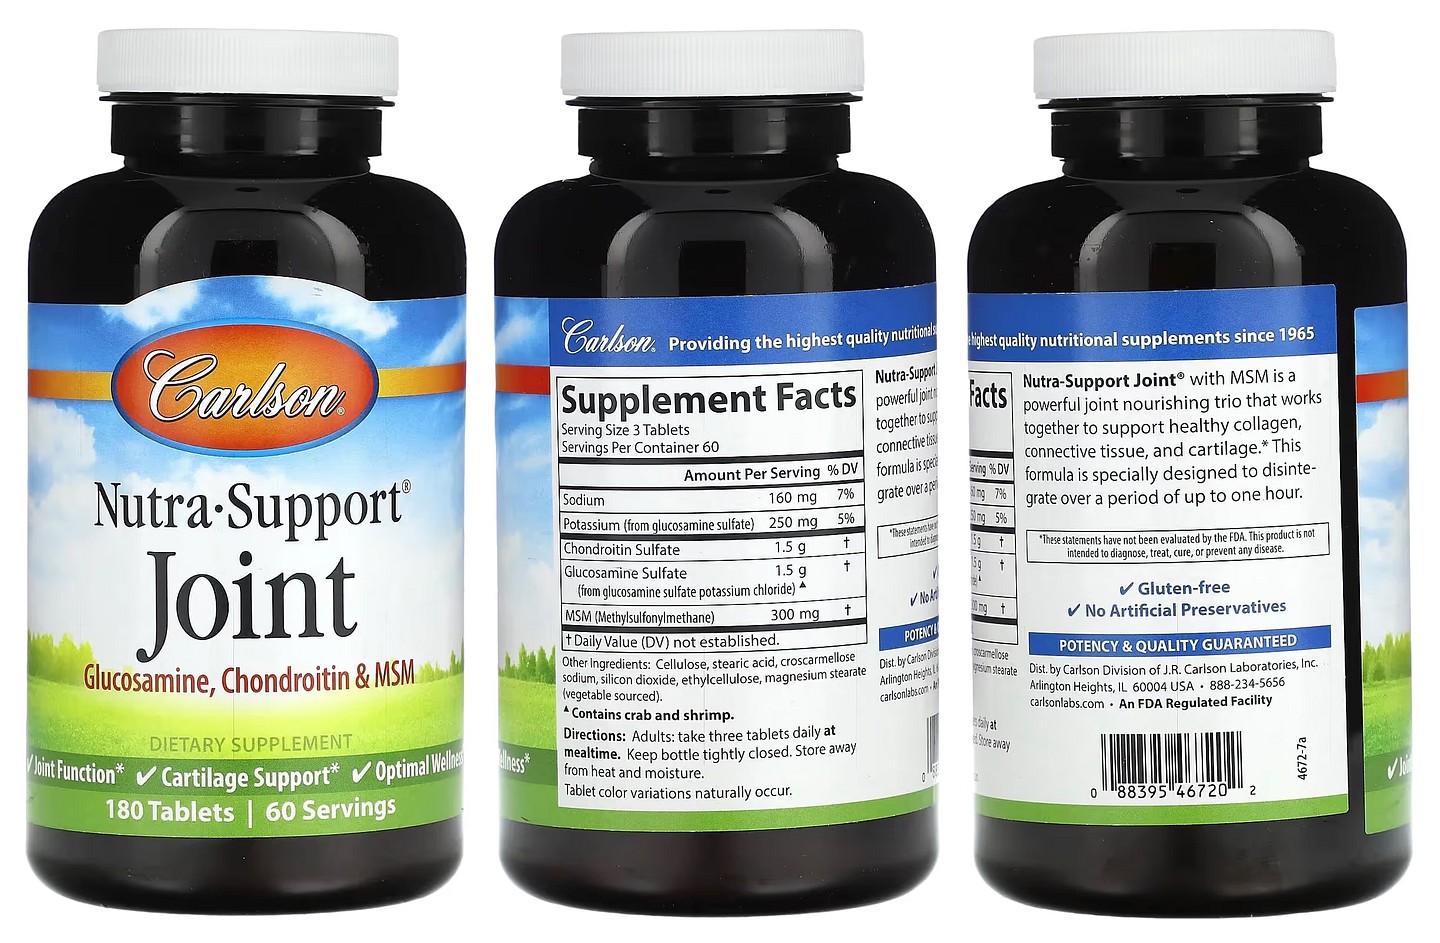 Carlson, Nutra-Support Joint packaging